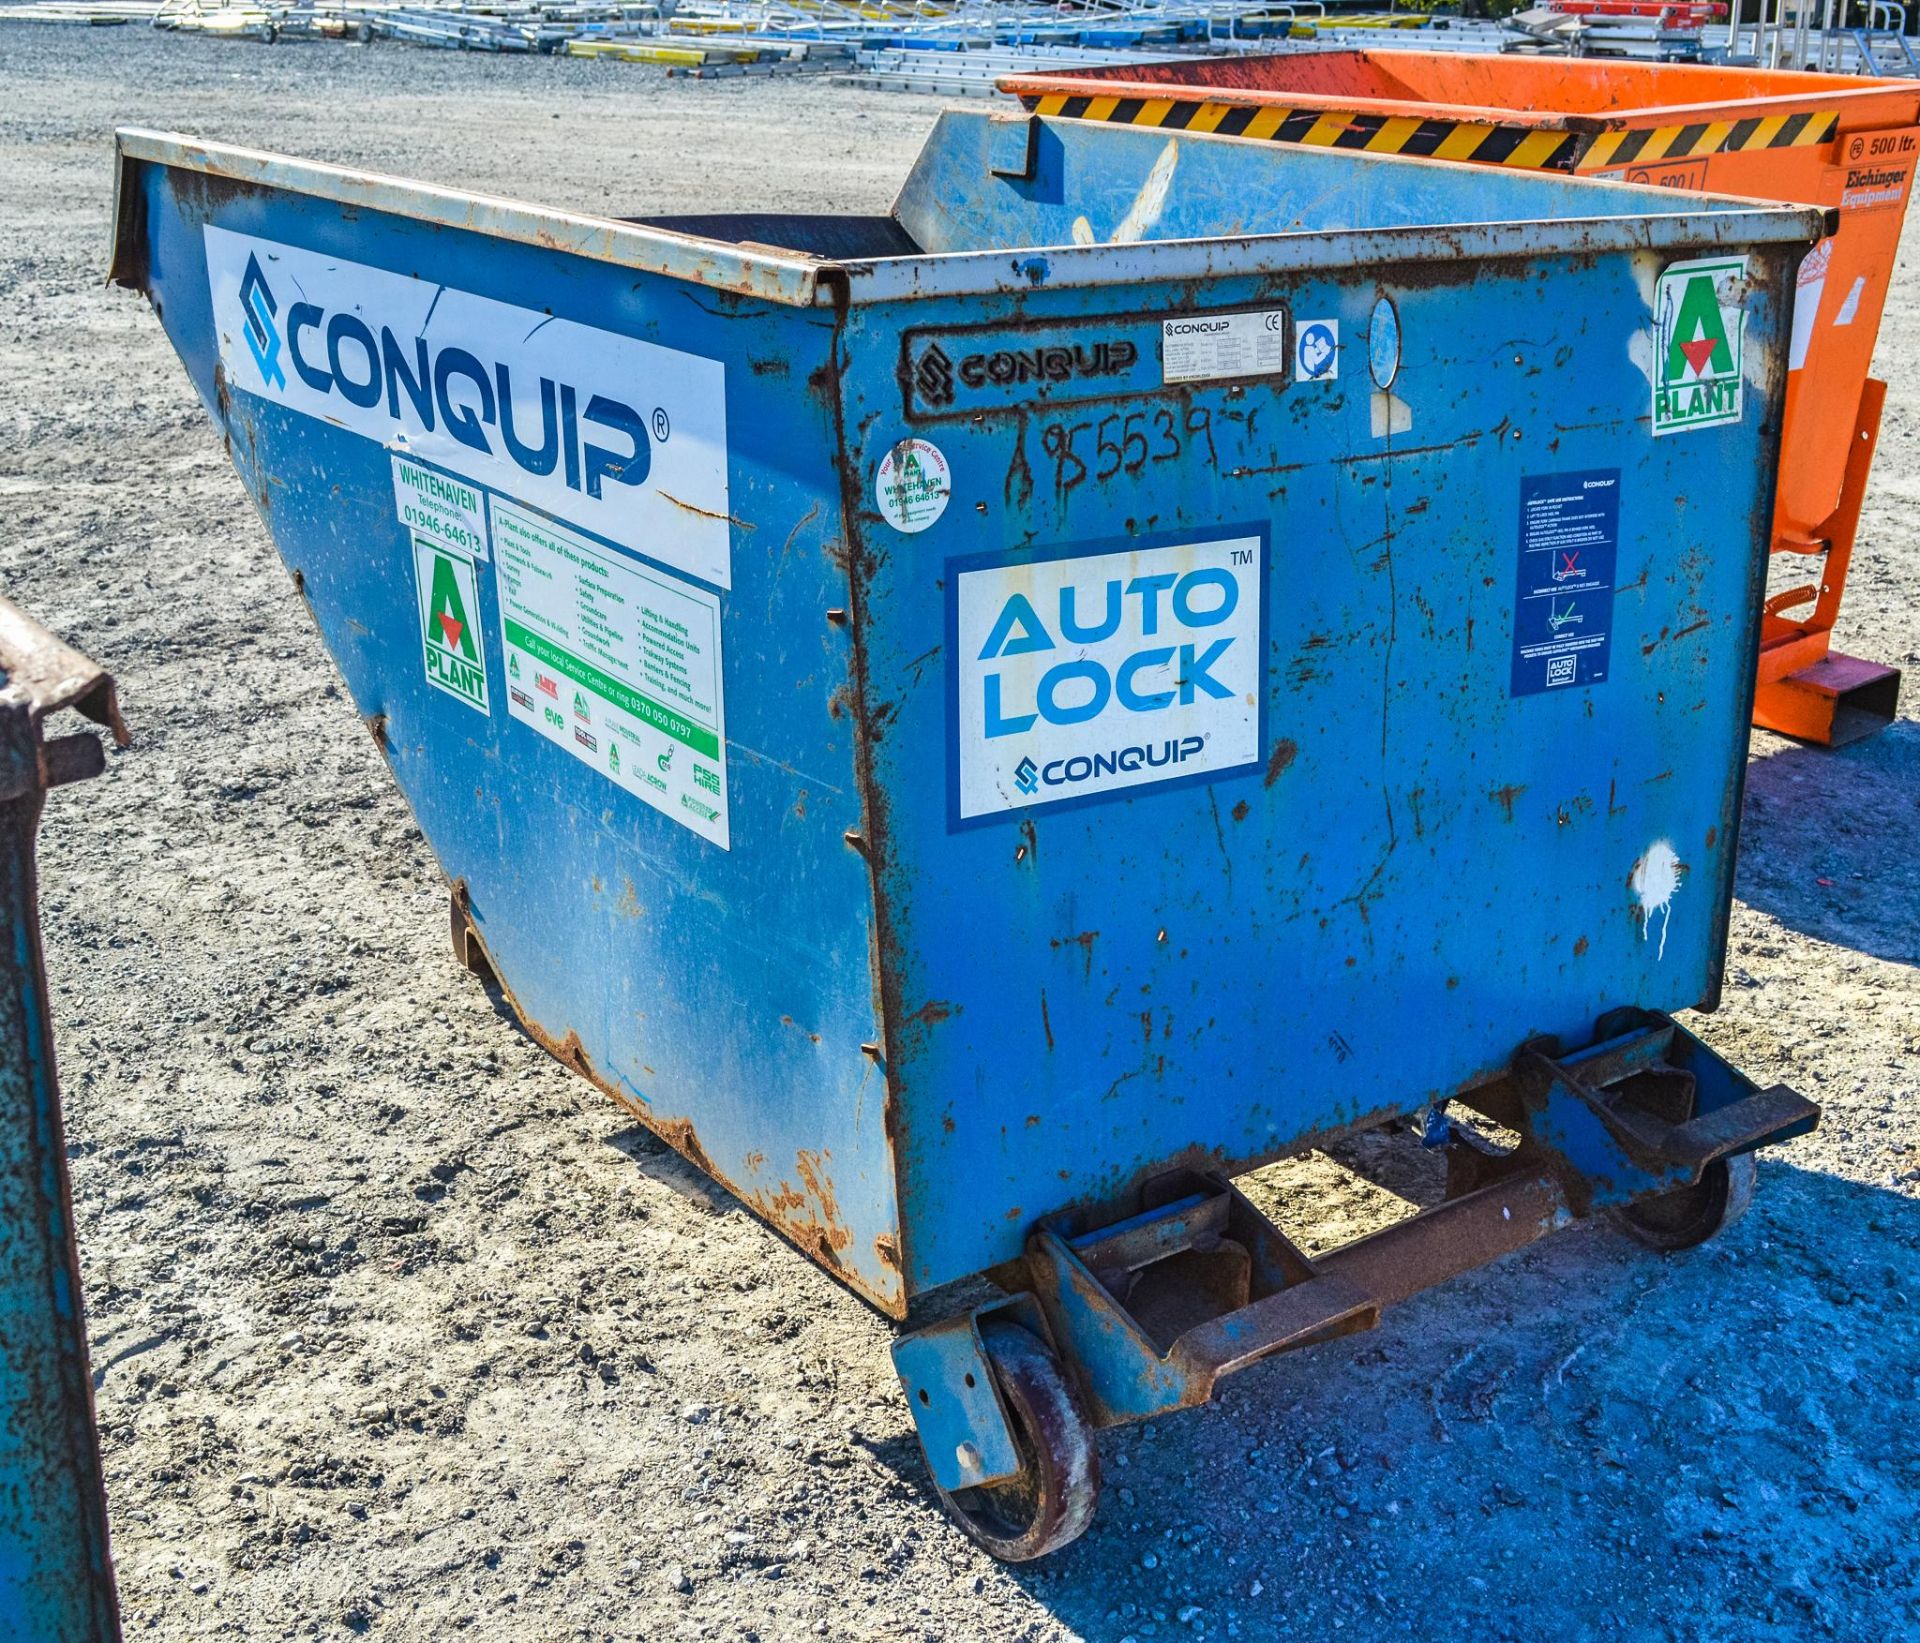 Conquip Autolock fork lift tipping skip  A955539 - Image 2 of 2